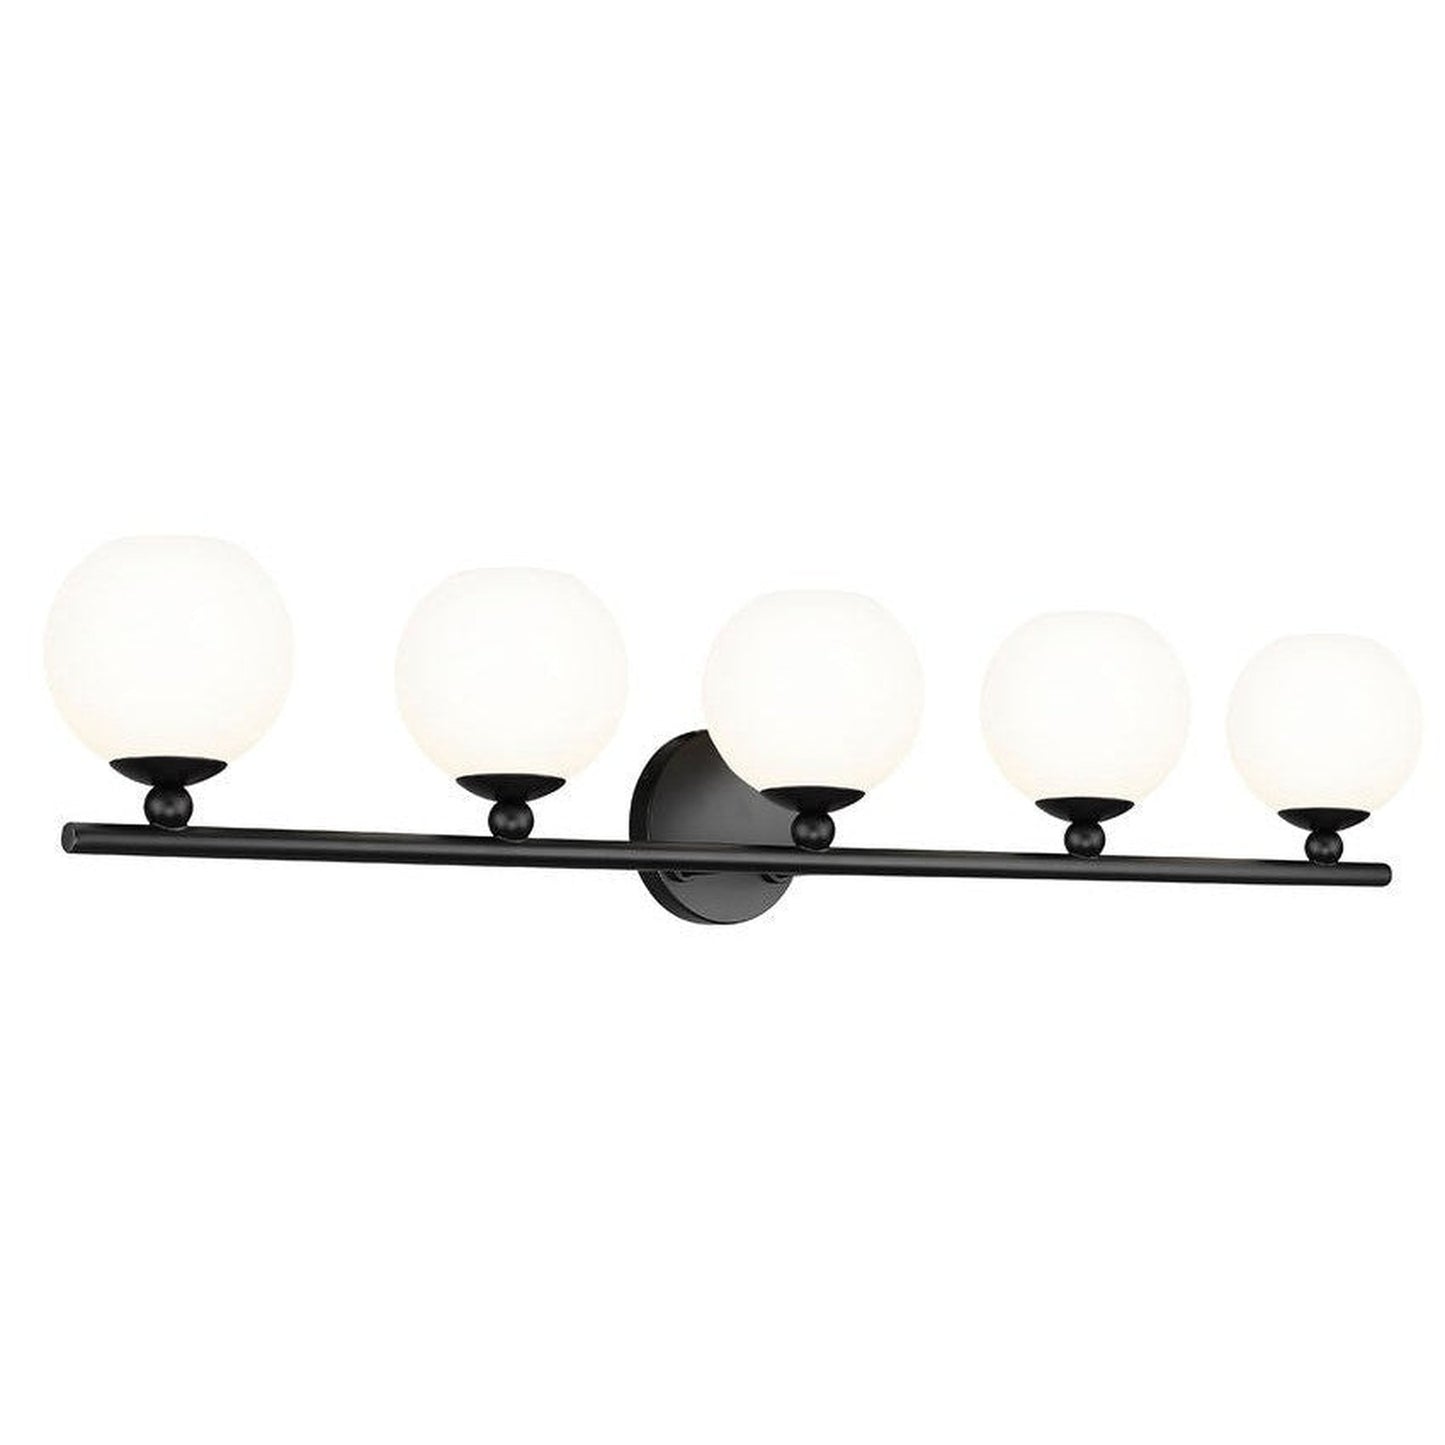 Z-Lite Neoma 38" 5-Light Matte Black and Opal Etched Glass Shade Vanity Light